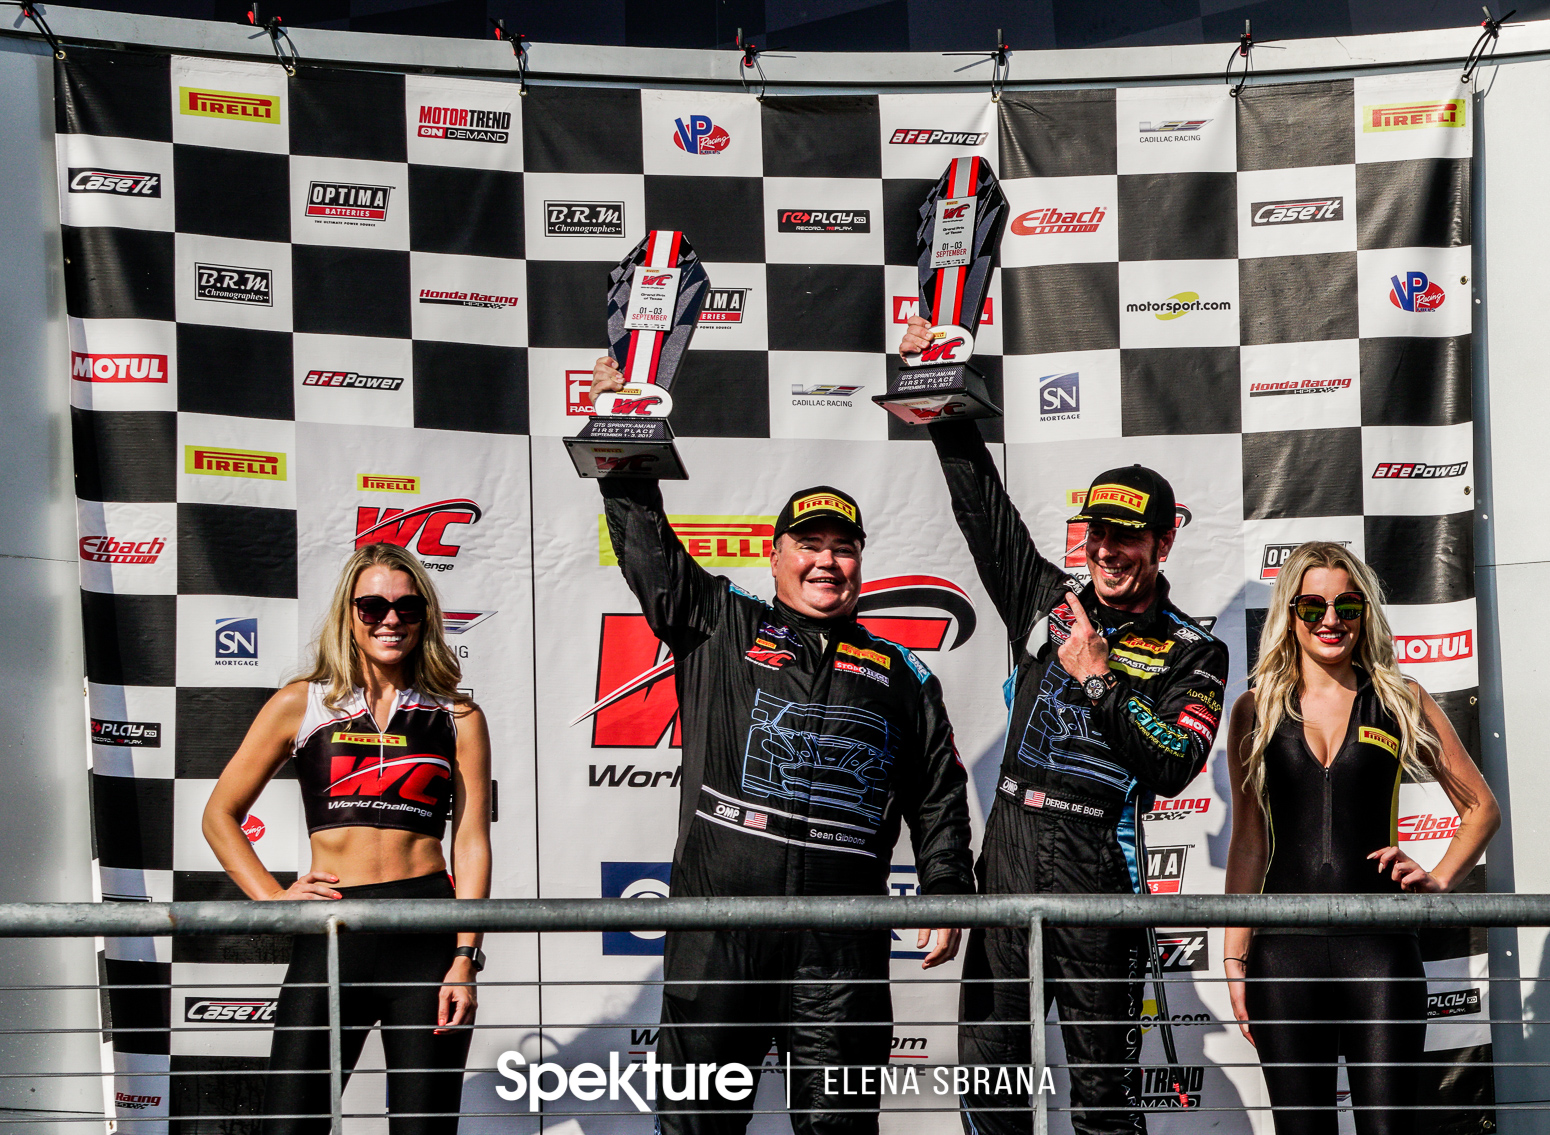 Earchphoto - Derek and Sean on the podium at COTA in 2017.